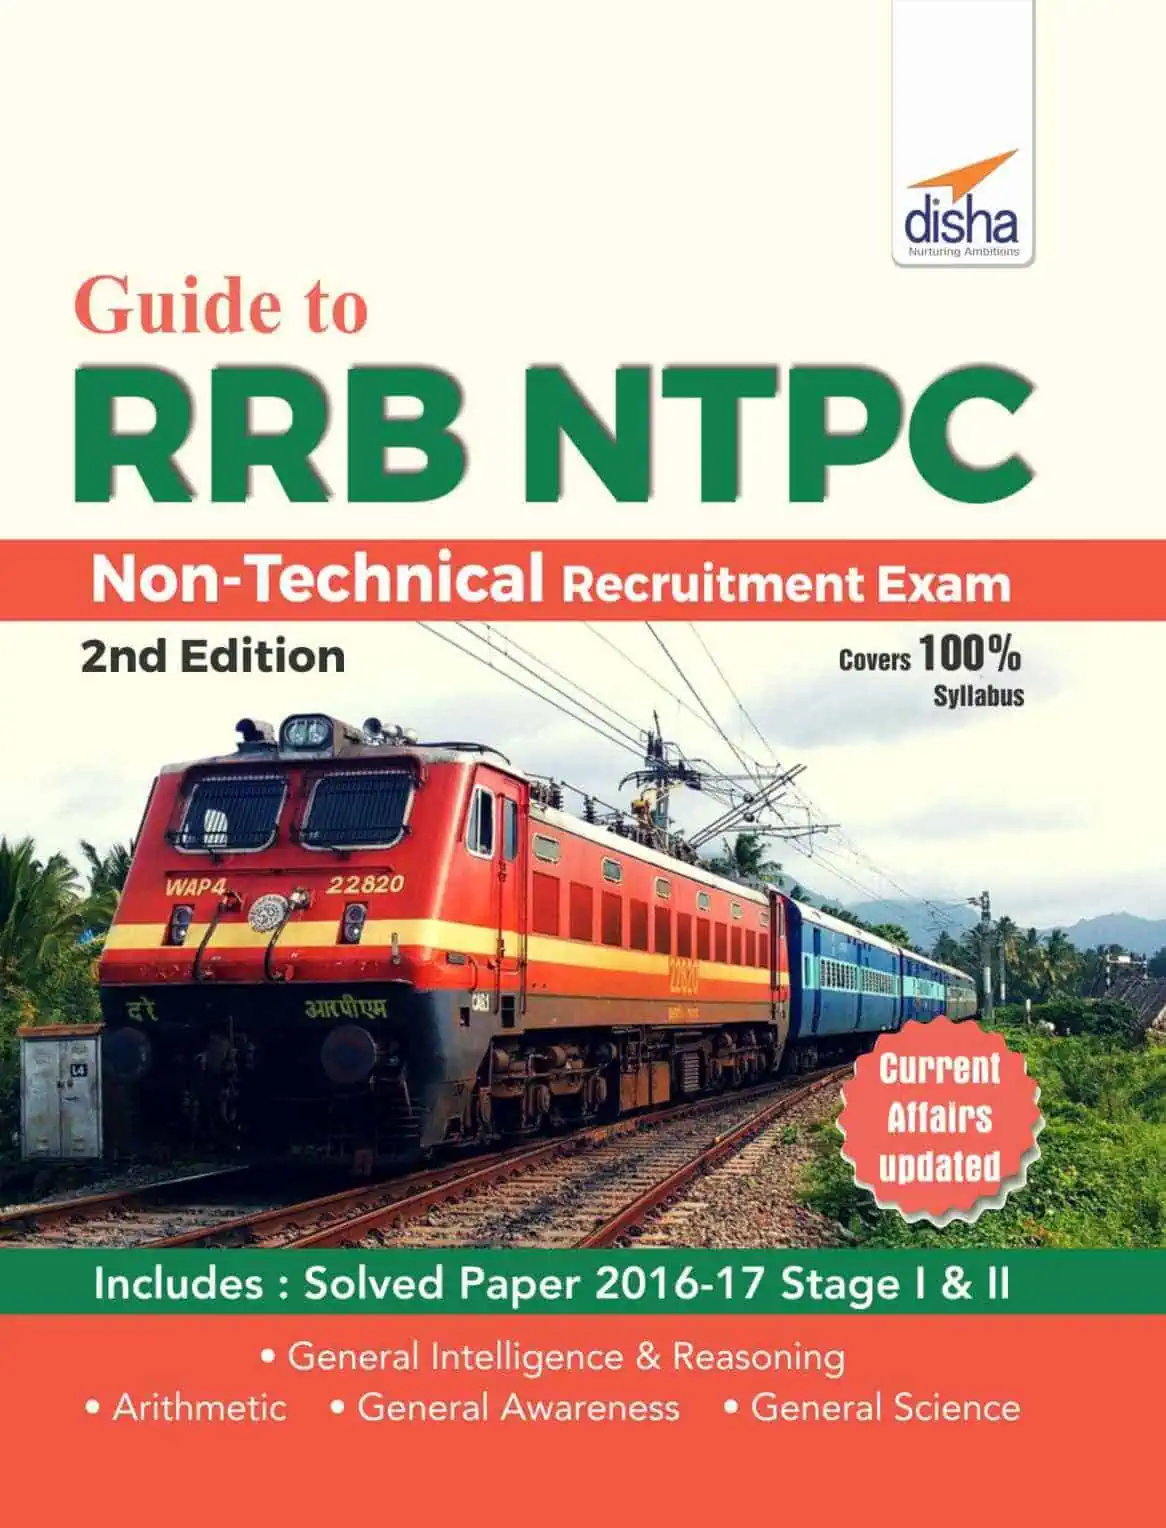 Guide to RRB NTPC Non Technical – Disha Experts [2nd Edition] PDF